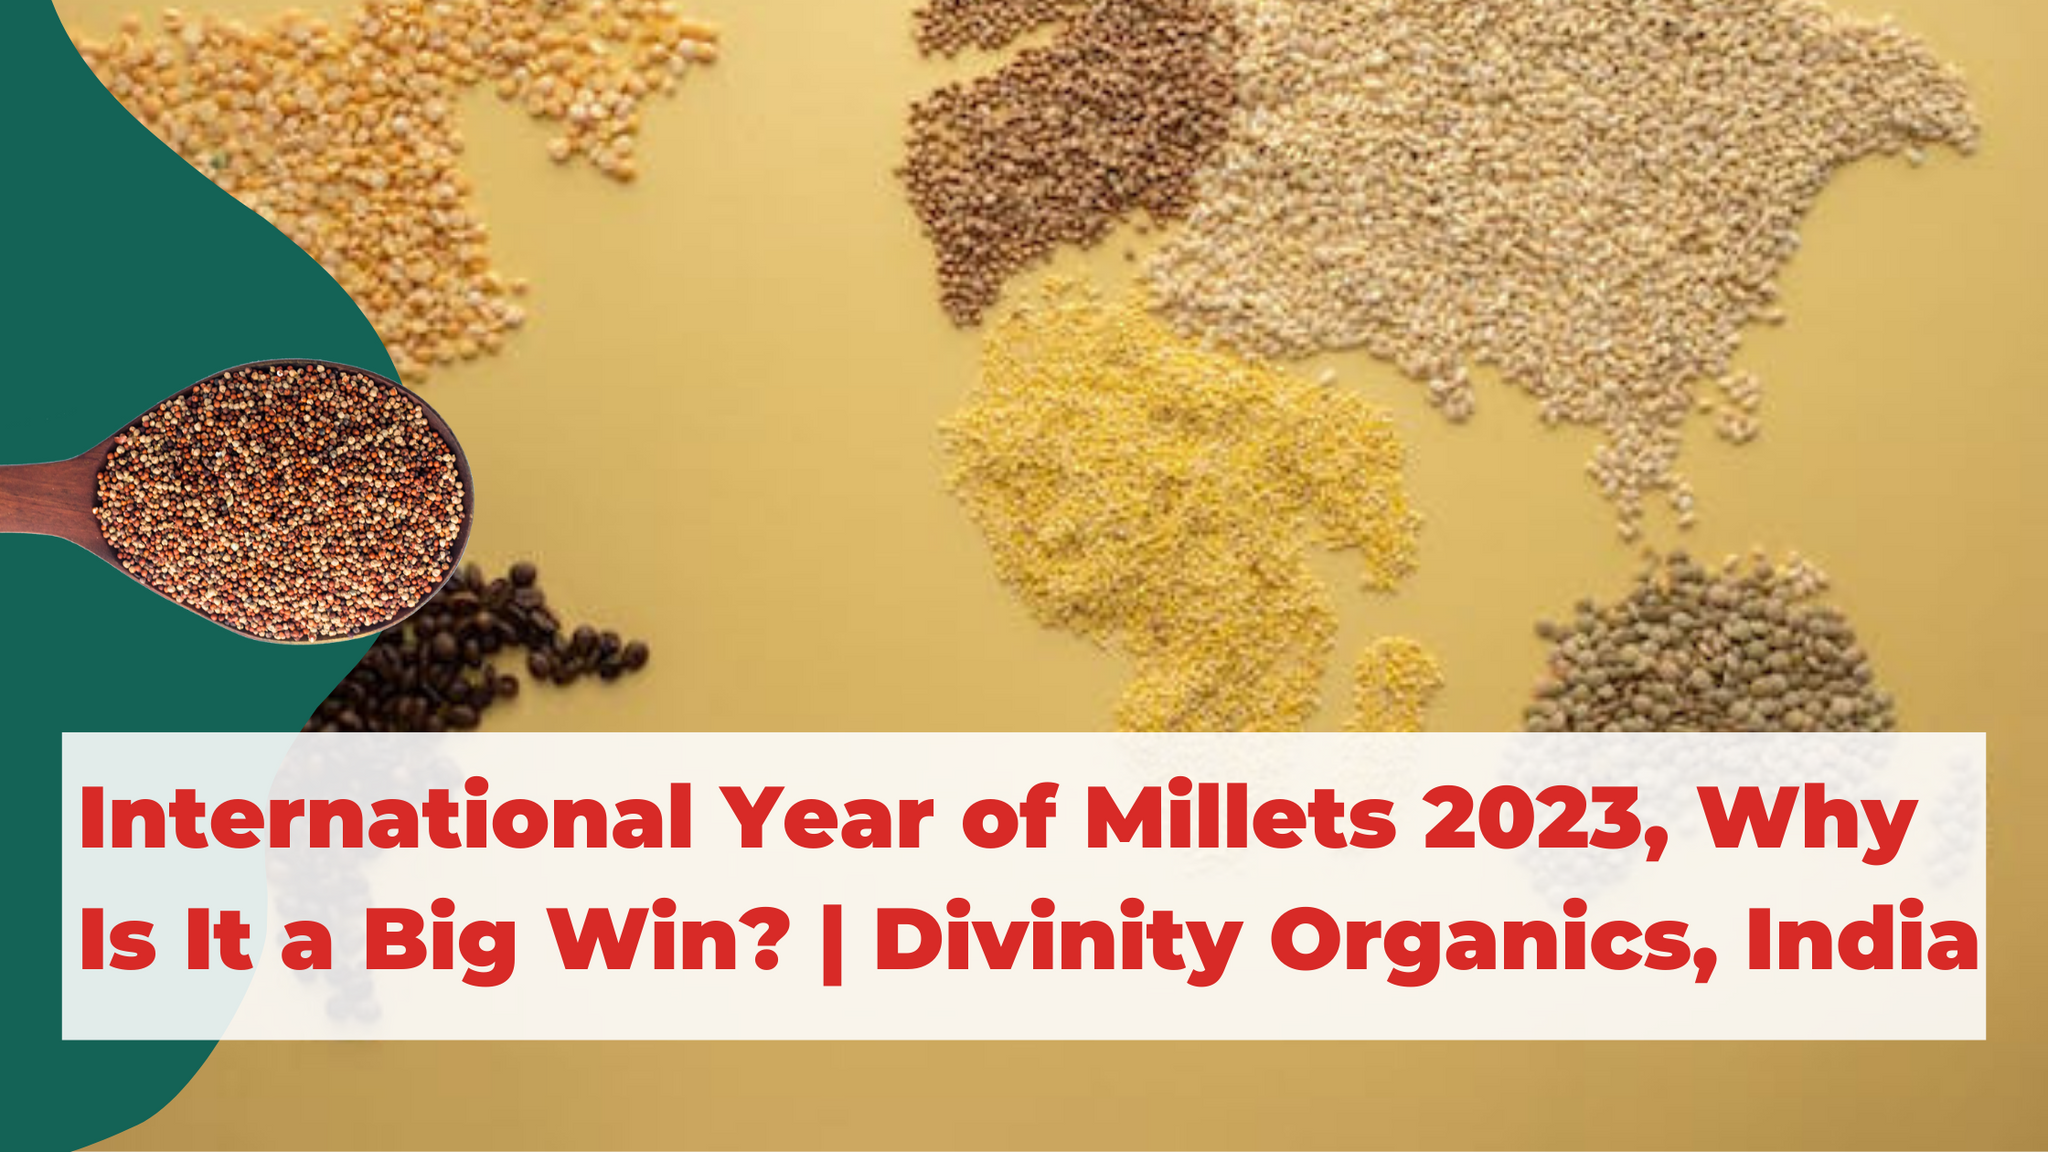 International Year of Millets 2023, Why Is It a Big Win? | Divinity Organics